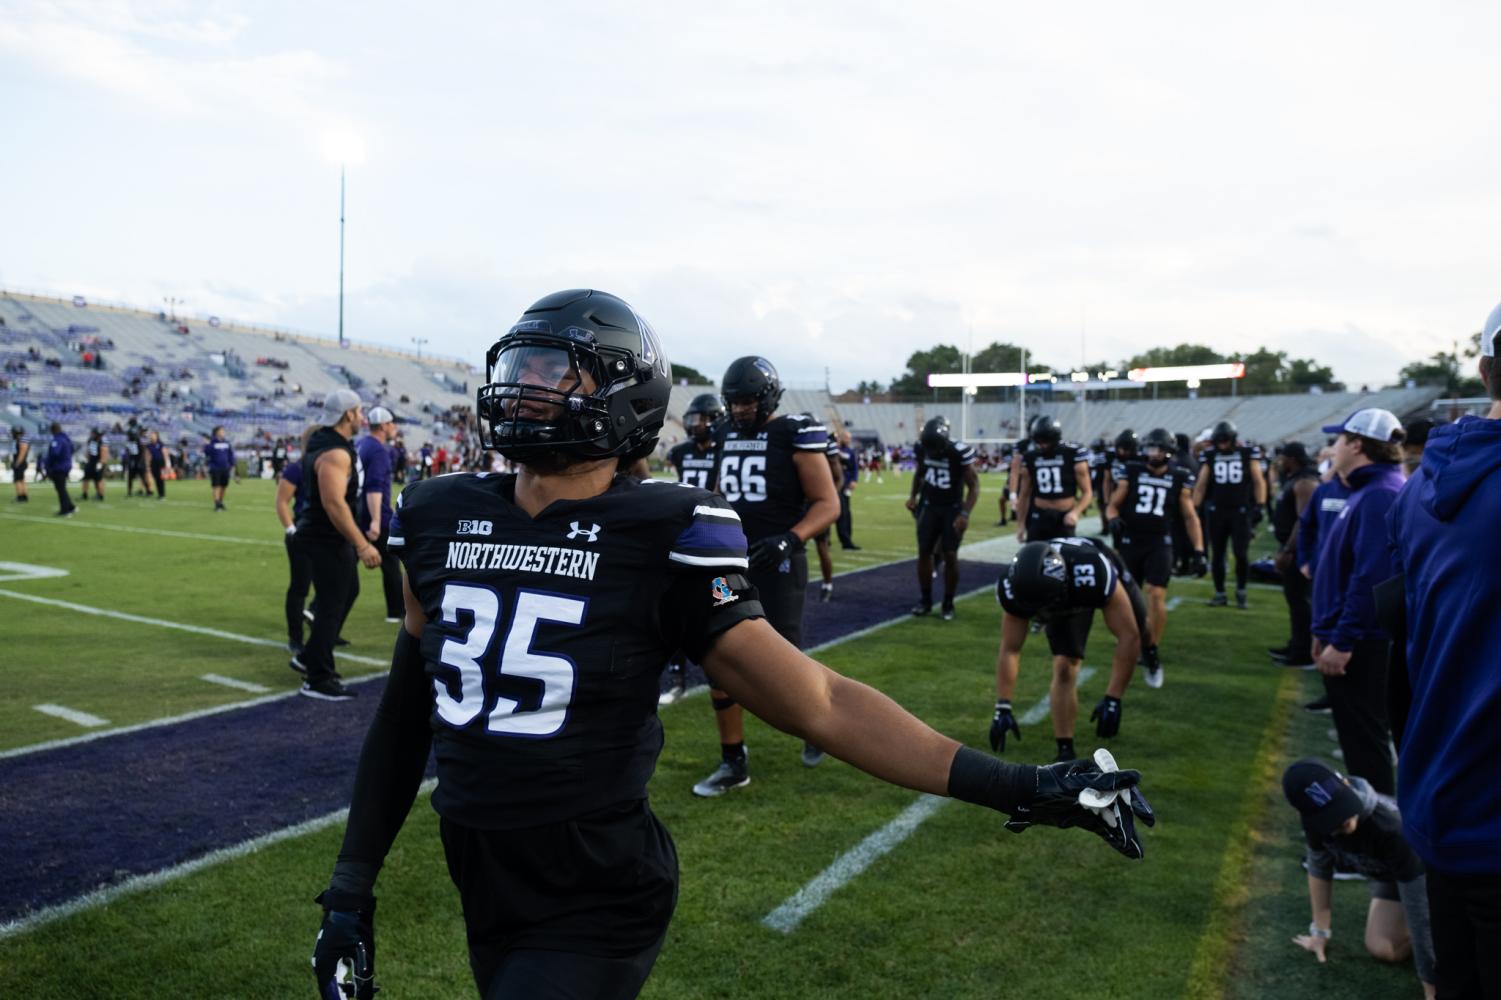 Players+in+black+uniforms+and+black+helmets+stretch+on+a+football+field+sideline.